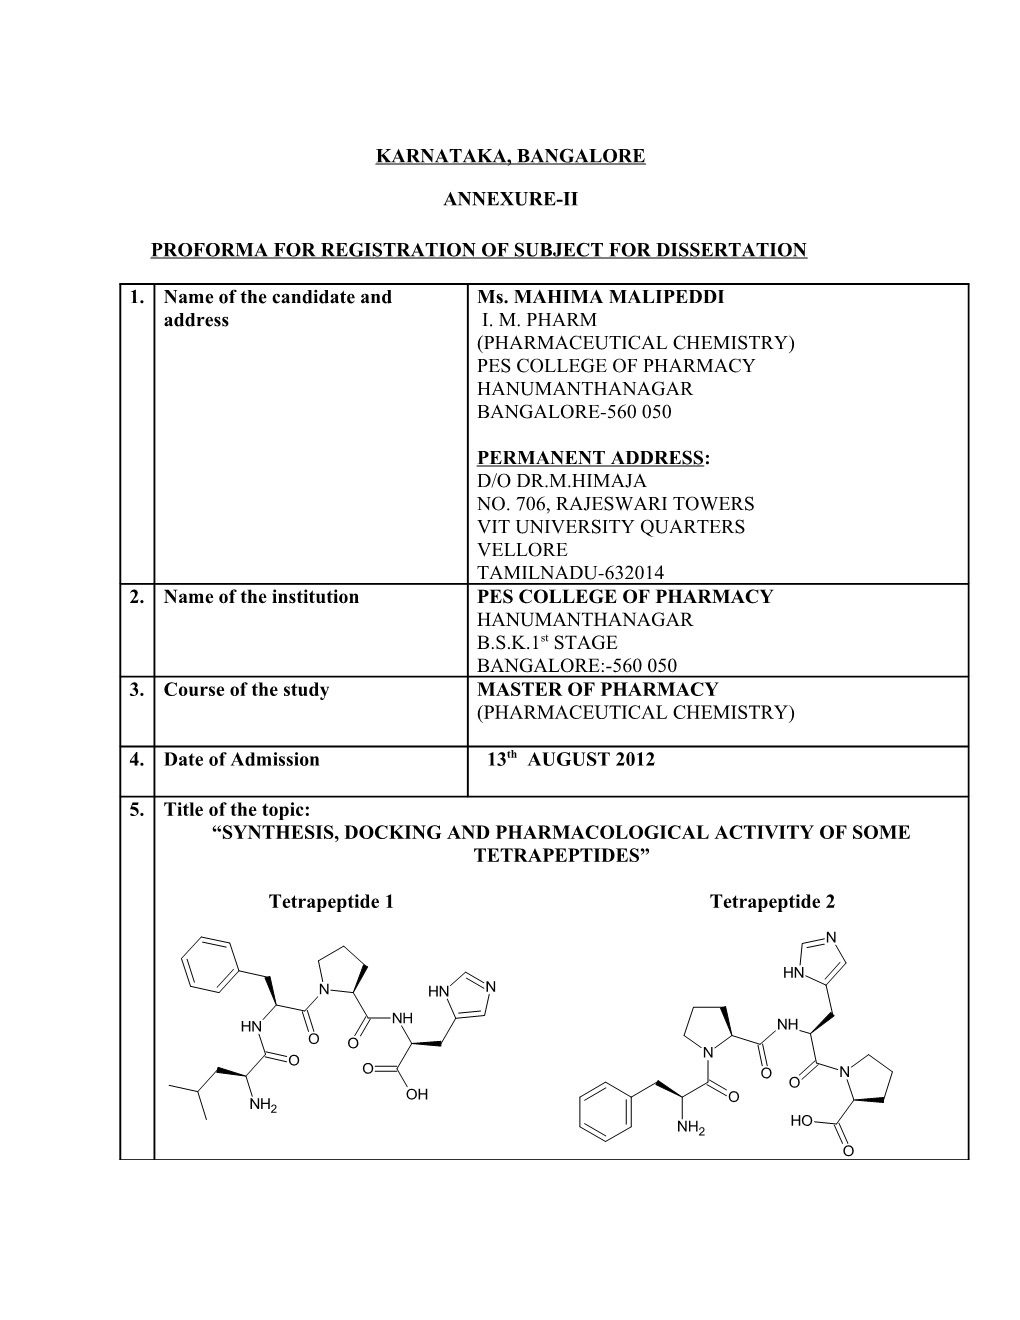 Synthesis, Docking and Pharmacological Evaluation of Some Tetrapeptides